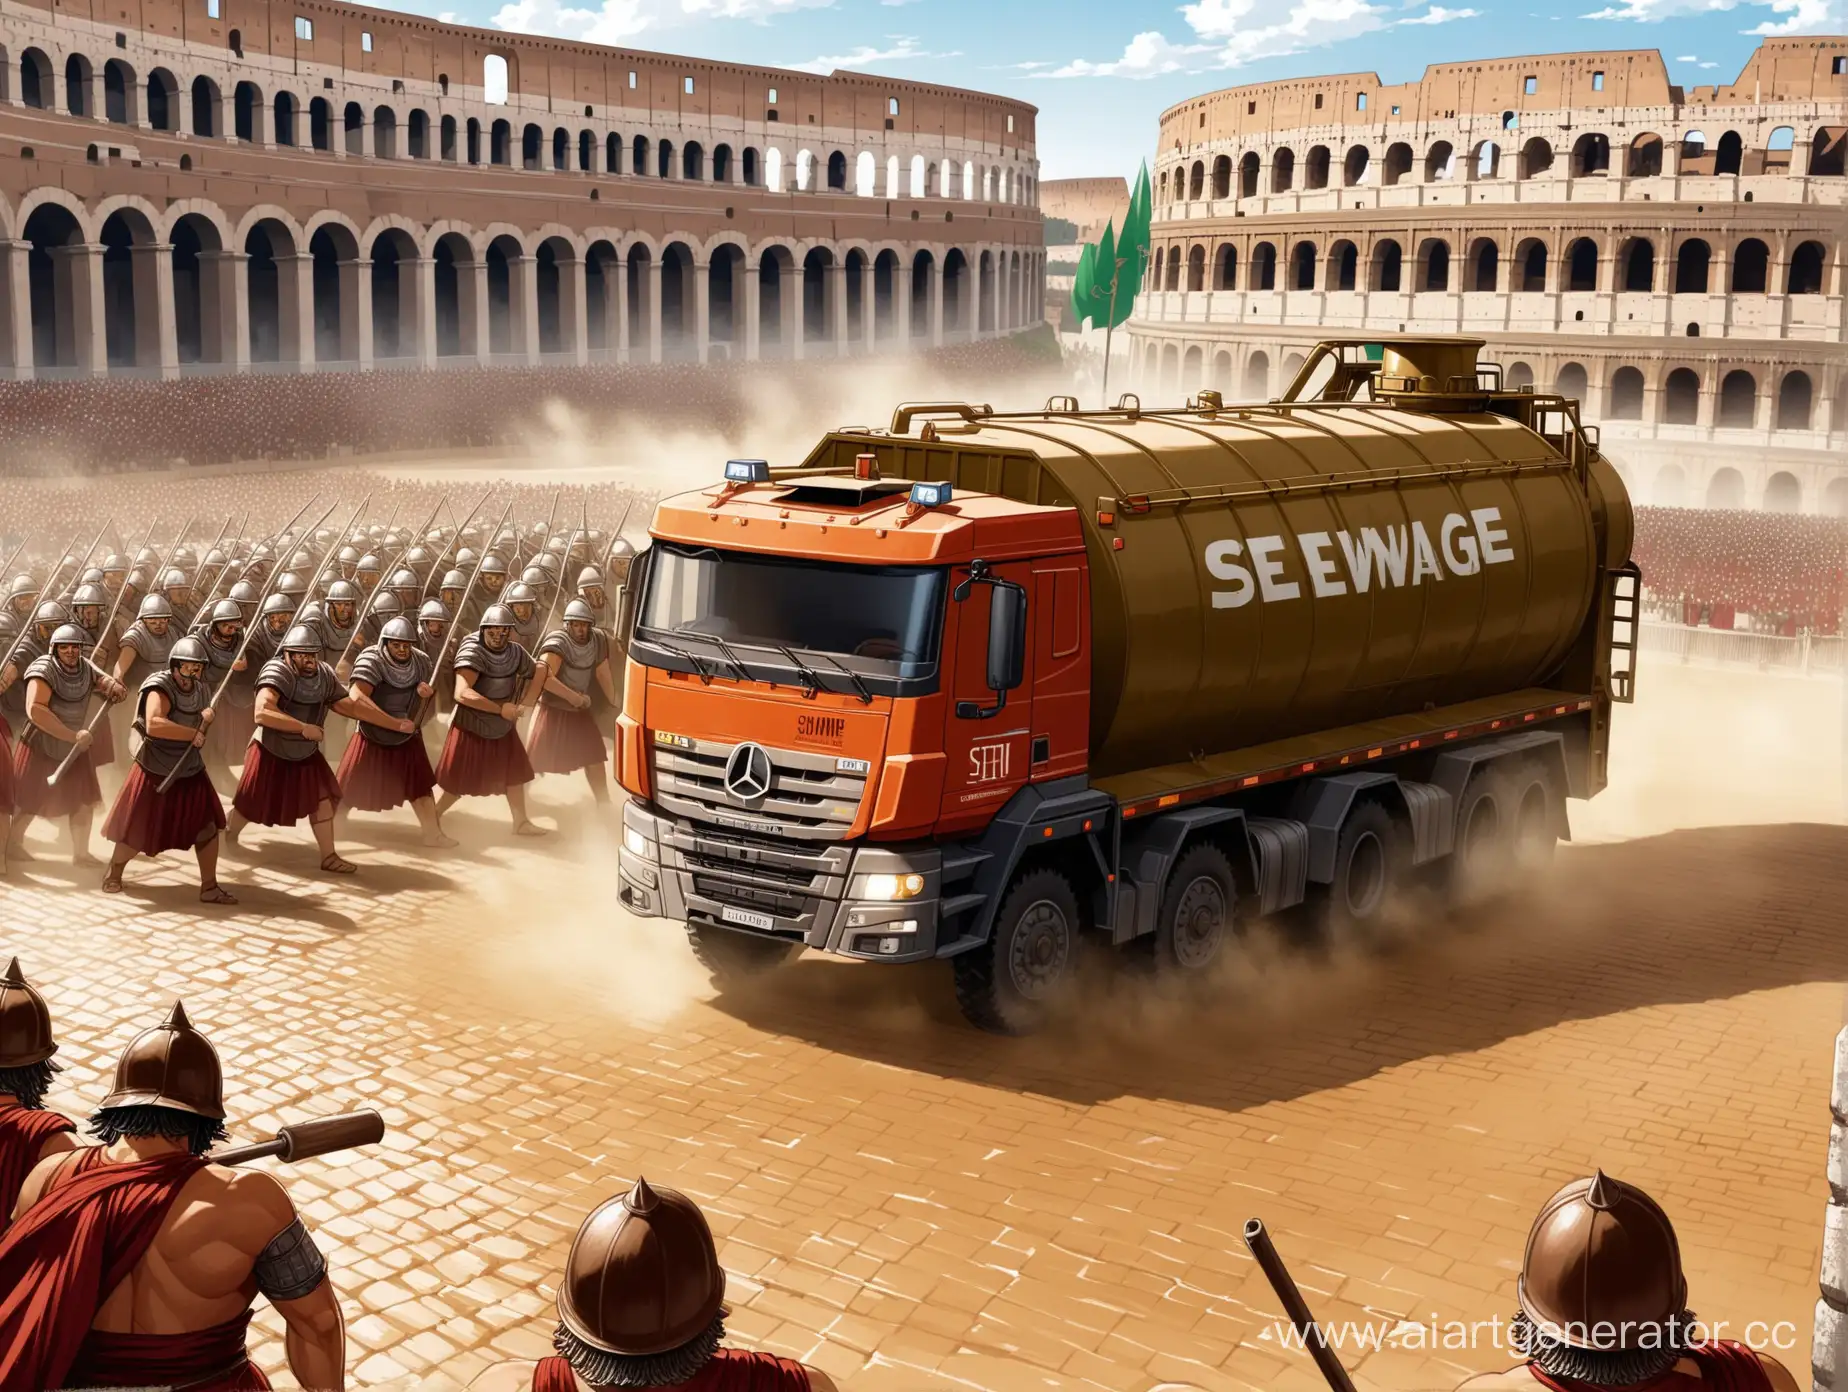 Sewage-Truck-Engages-in-Rome-Battle